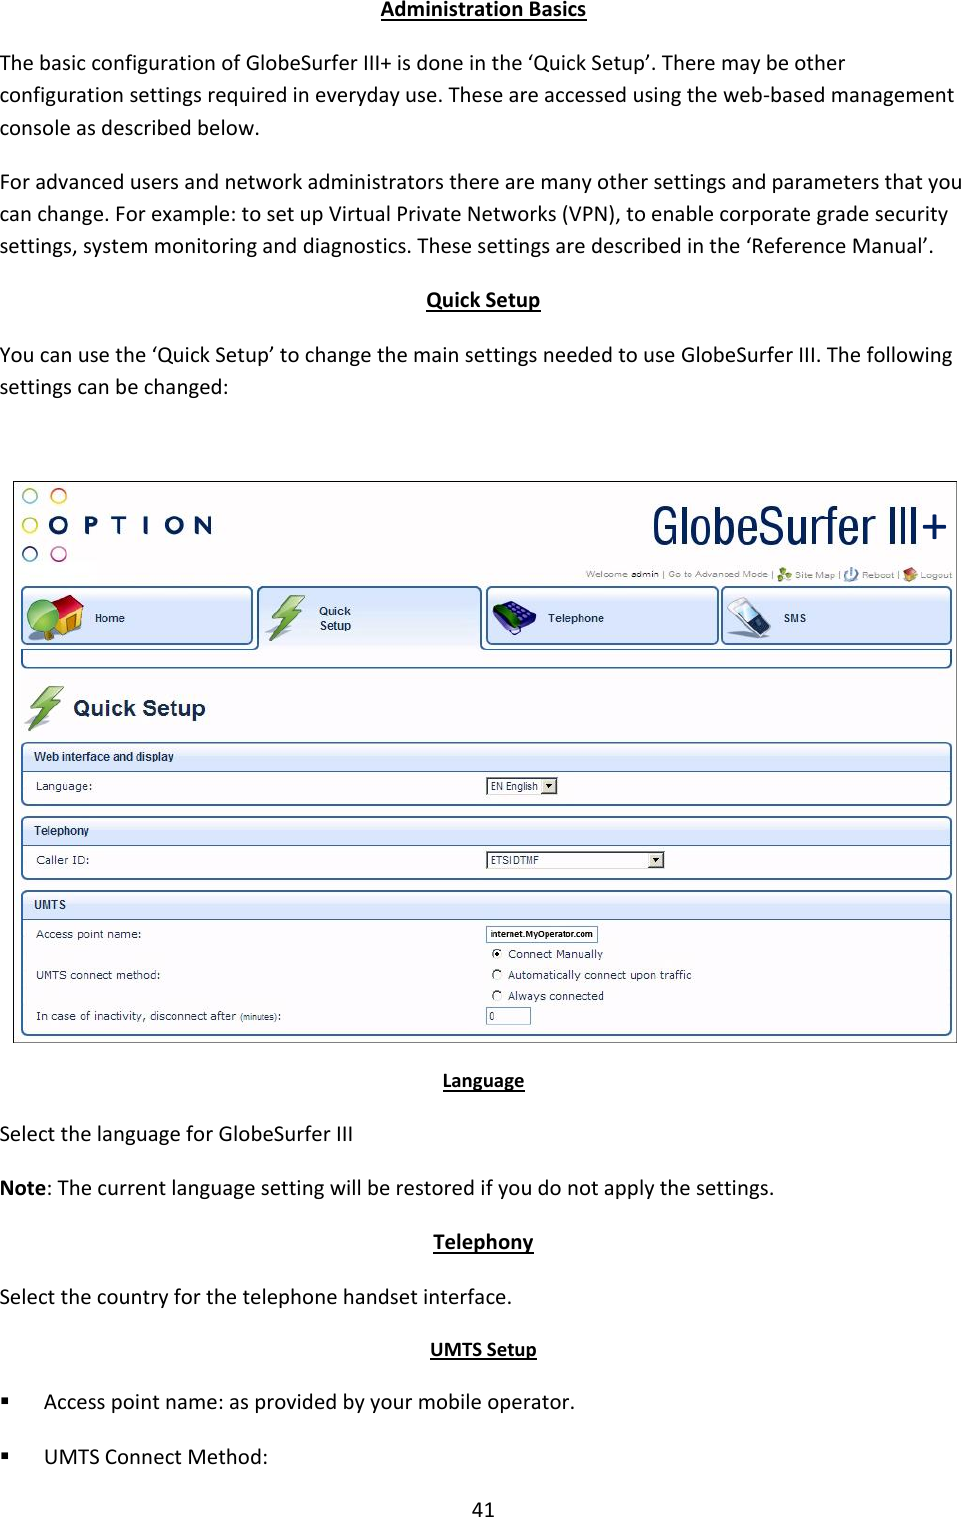 41 Administration Basics The basic configuration of GlobeSurfer III+ is done in the ‘Quick Setup’. There may be other configuration settings required in everyday use. These are accessed using the web-based management console as described below. For advanced users and network administrators there are many other settings and parameters that you can change. For example: to set up Virtual Private Networks (VPN), to enable corporate grade security settings, system monitoring and diagnostics. These settings are described in the ‘Reference Manual’. Quick Setup You can use the ‘Quick Setup’ to change the main settings needed to use GlobeSurfer III. The following settings can be changed:   Language Select the language for GlobeSurfer III Note: The current language setting will be restored if you do not apply the settings. Telephony Select the country for the telephone handset interface. UMTS Setup  Access point name: as provided by your mobile operator.  UMTS Connect Method: + 